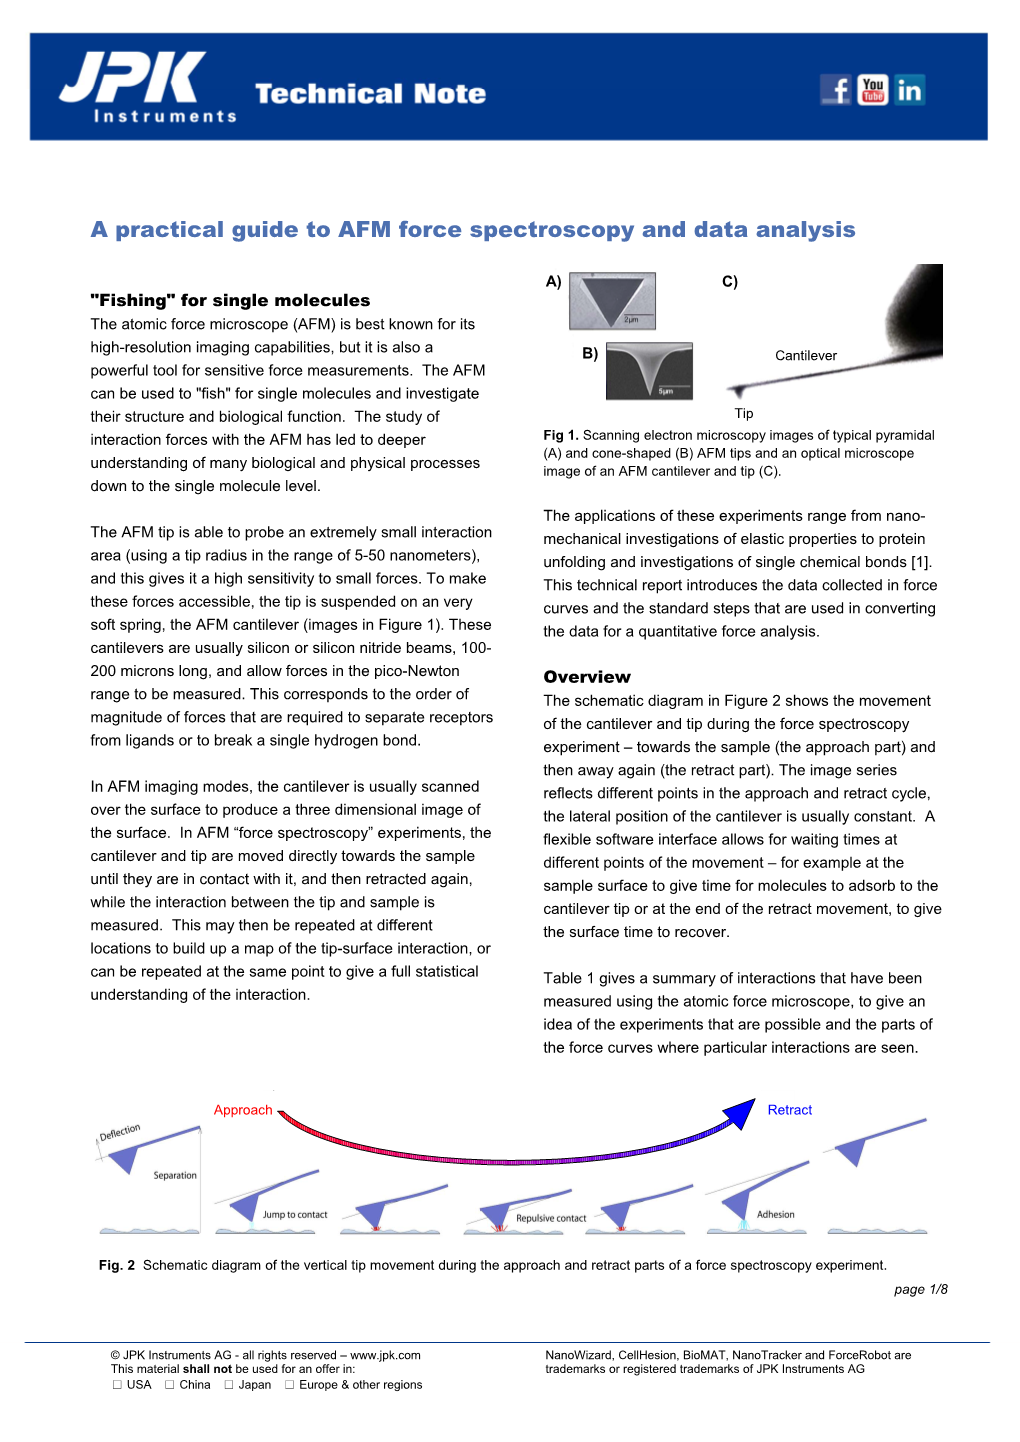 A Practical Guide to AFM Force Spectroscopy and Data Analysis